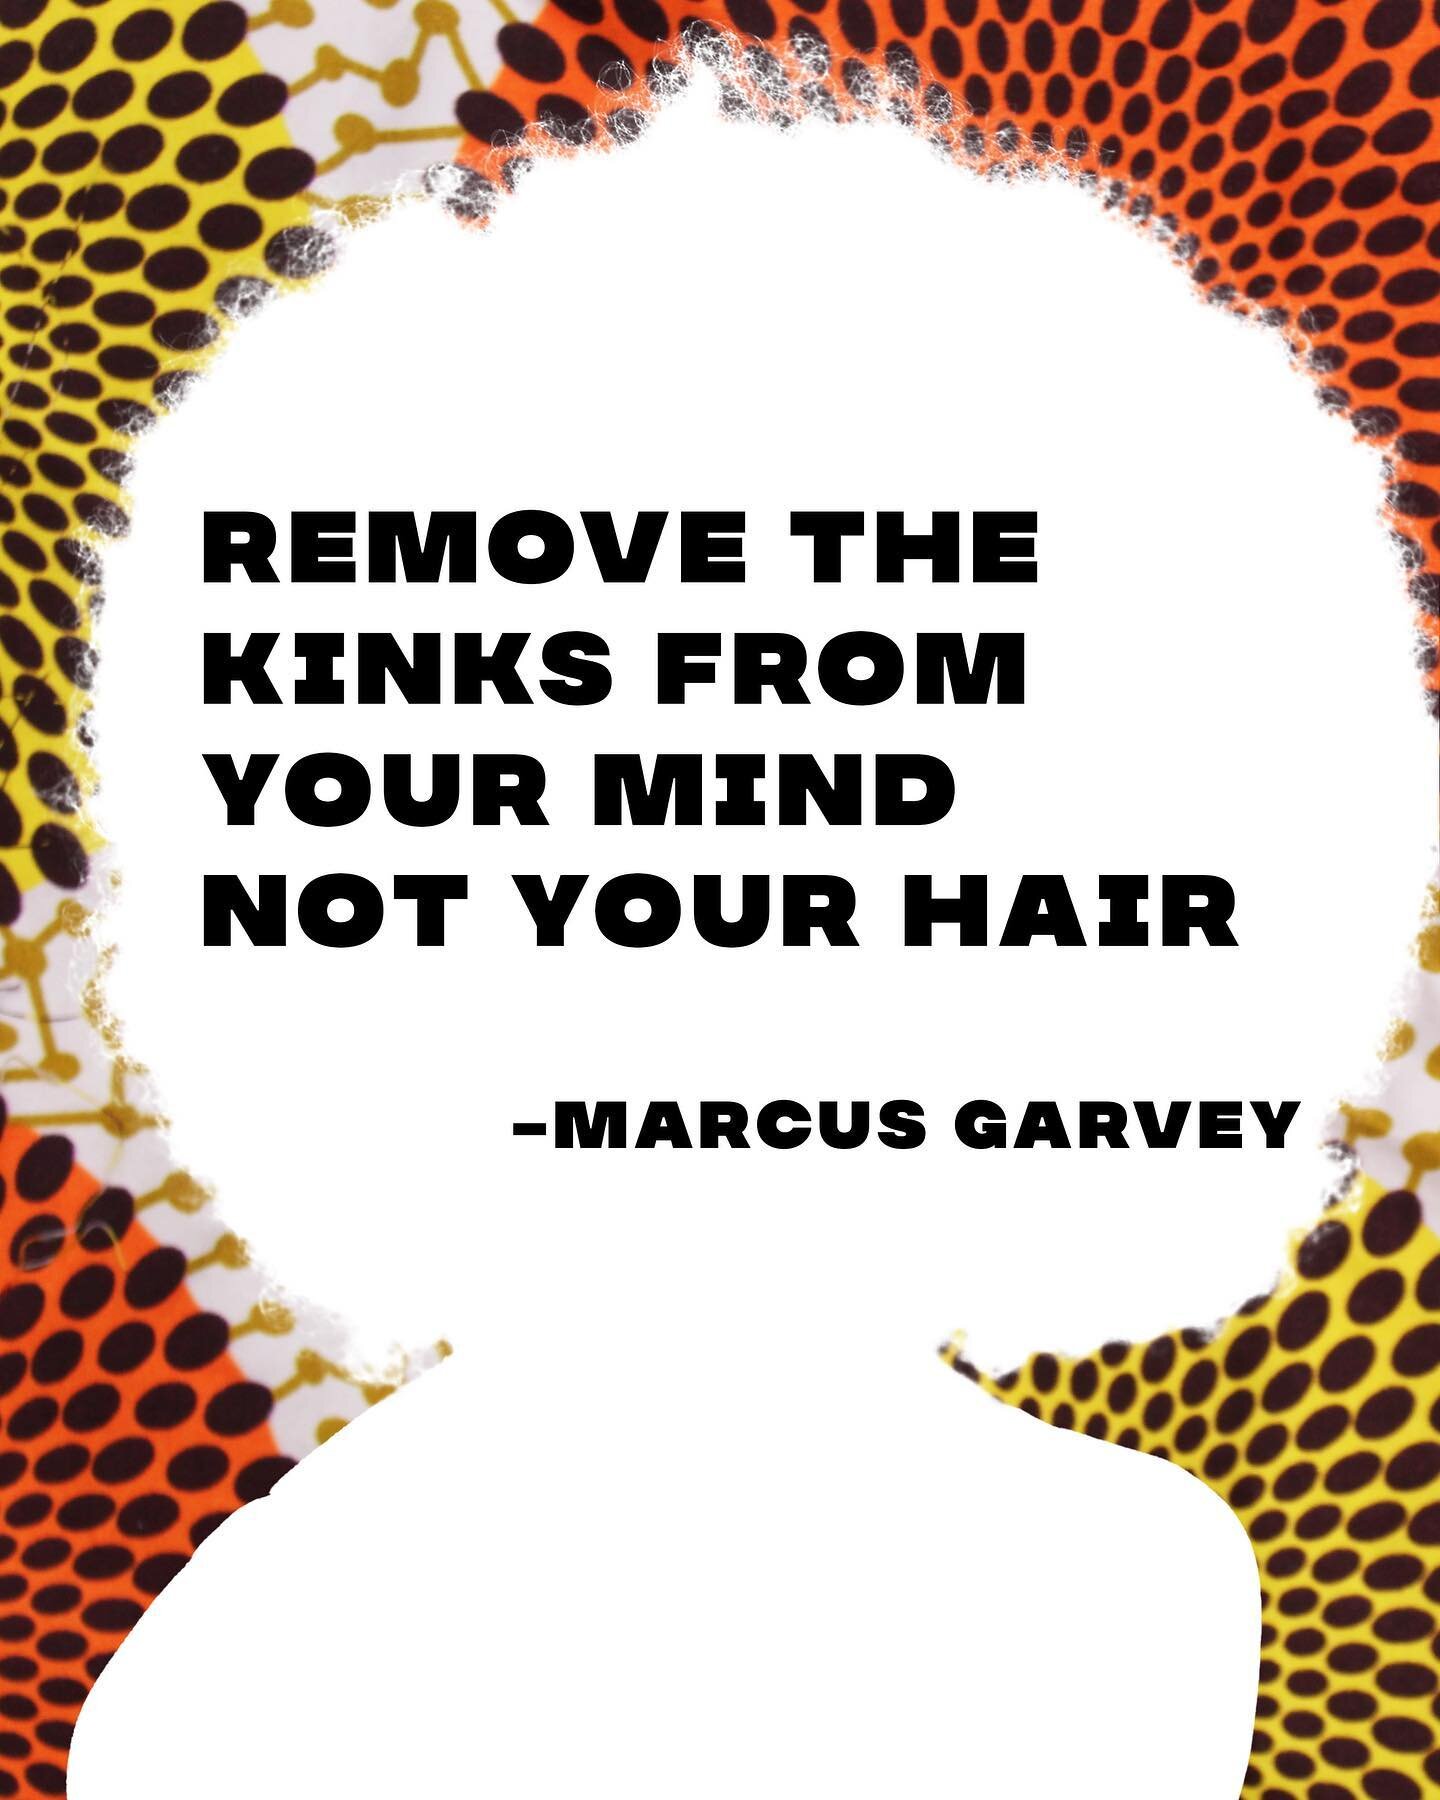 An important quote from Marcus Garvey #blackisbeautiful